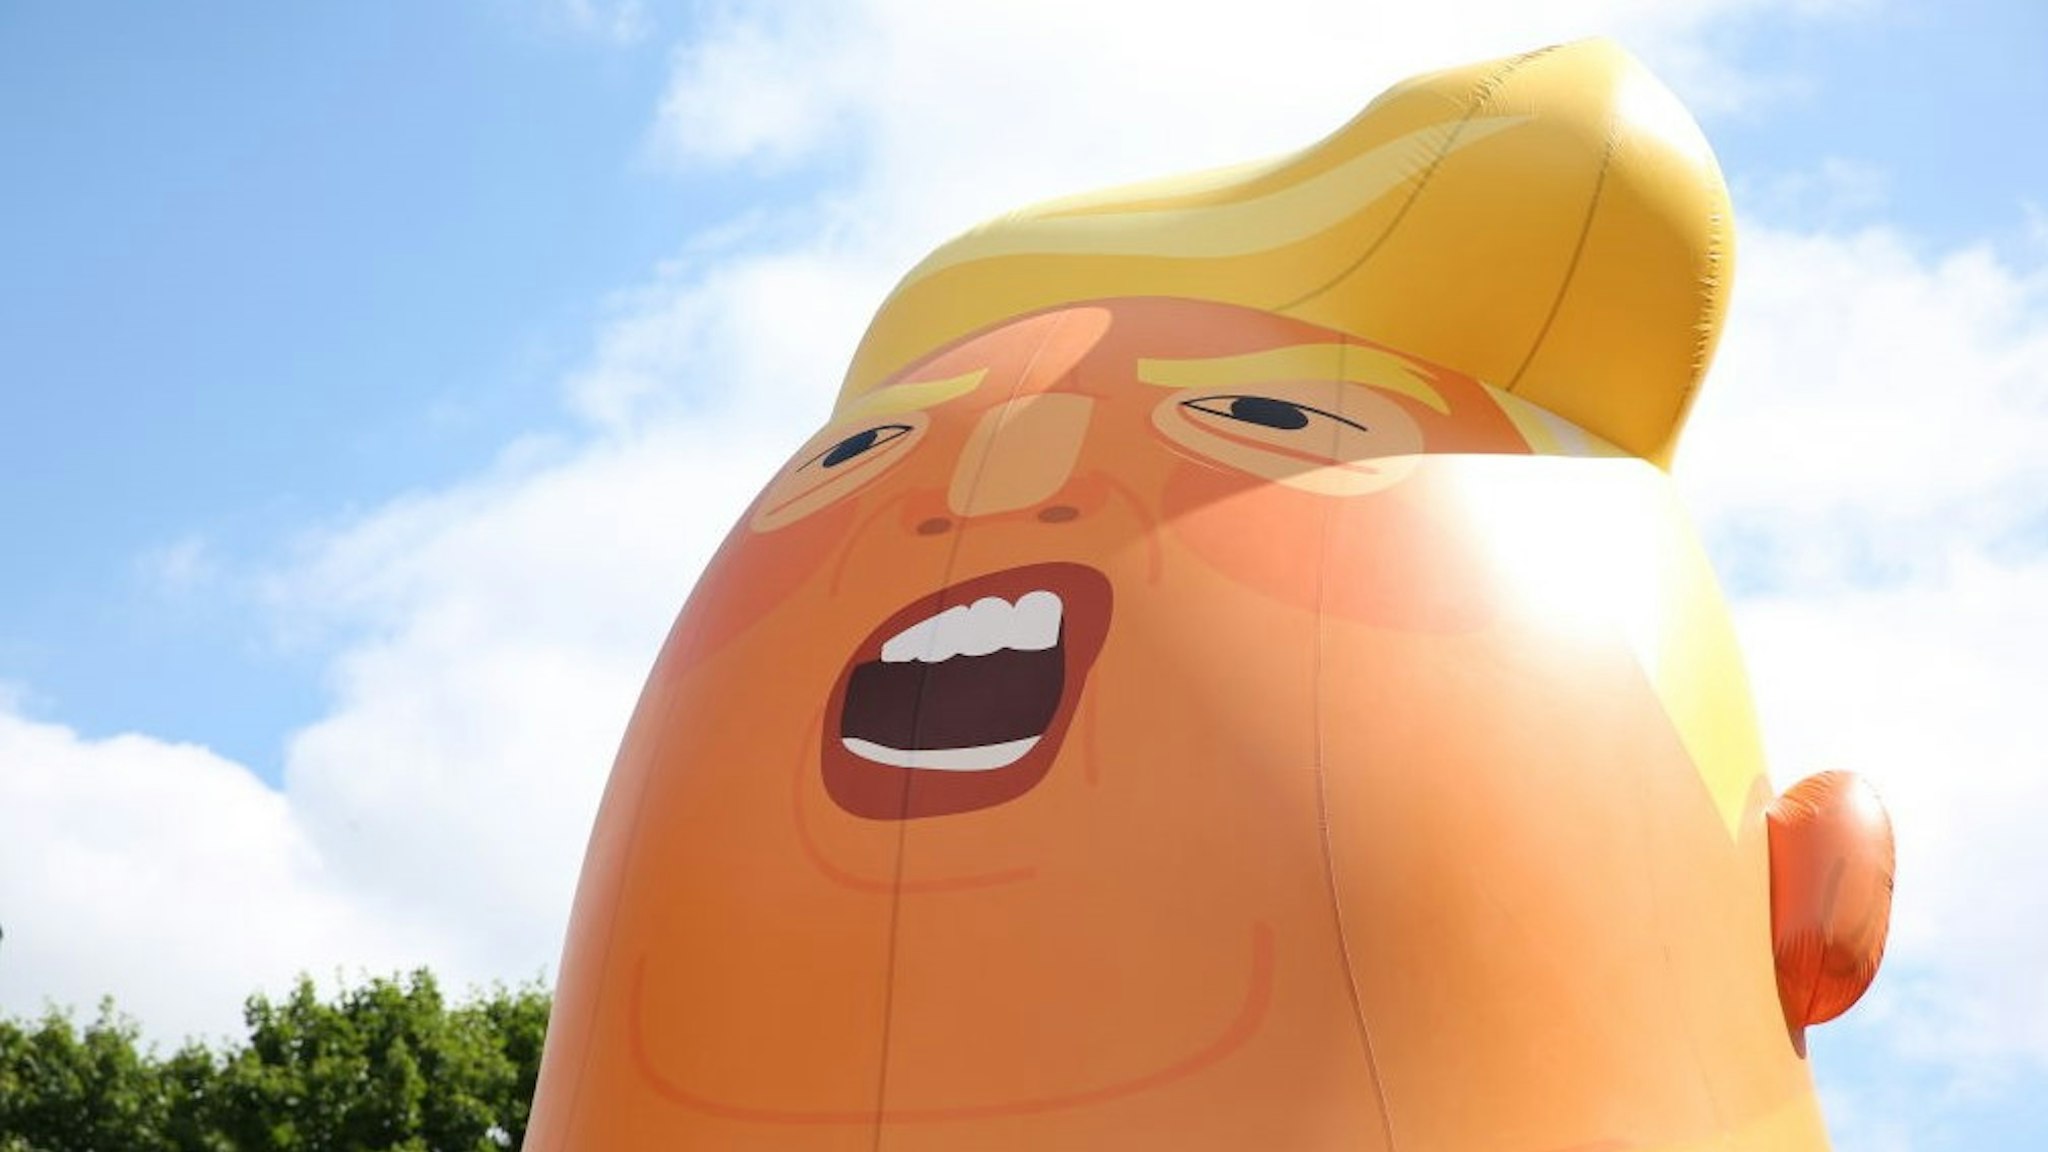 Activists inflate a giant balloon depicting US President Donald Trump as an orange baby in north London on July 10, 2018 ahead of a demonstration in London to coincide with the visit of the US president. - A barrage of nationwide protests will greet US President Donald Trump's four-day trip to Britain from Thursday, with organisers hoping to stage one of the country's biggest demonstrations in decades following a series of diplomatic spats. A giant inflatable "Baby Trump" balloon will be flown near the Houses of Parliament ahead of the protest. (Photo by Isabel INFANTES / AFP) (Photo credit should read